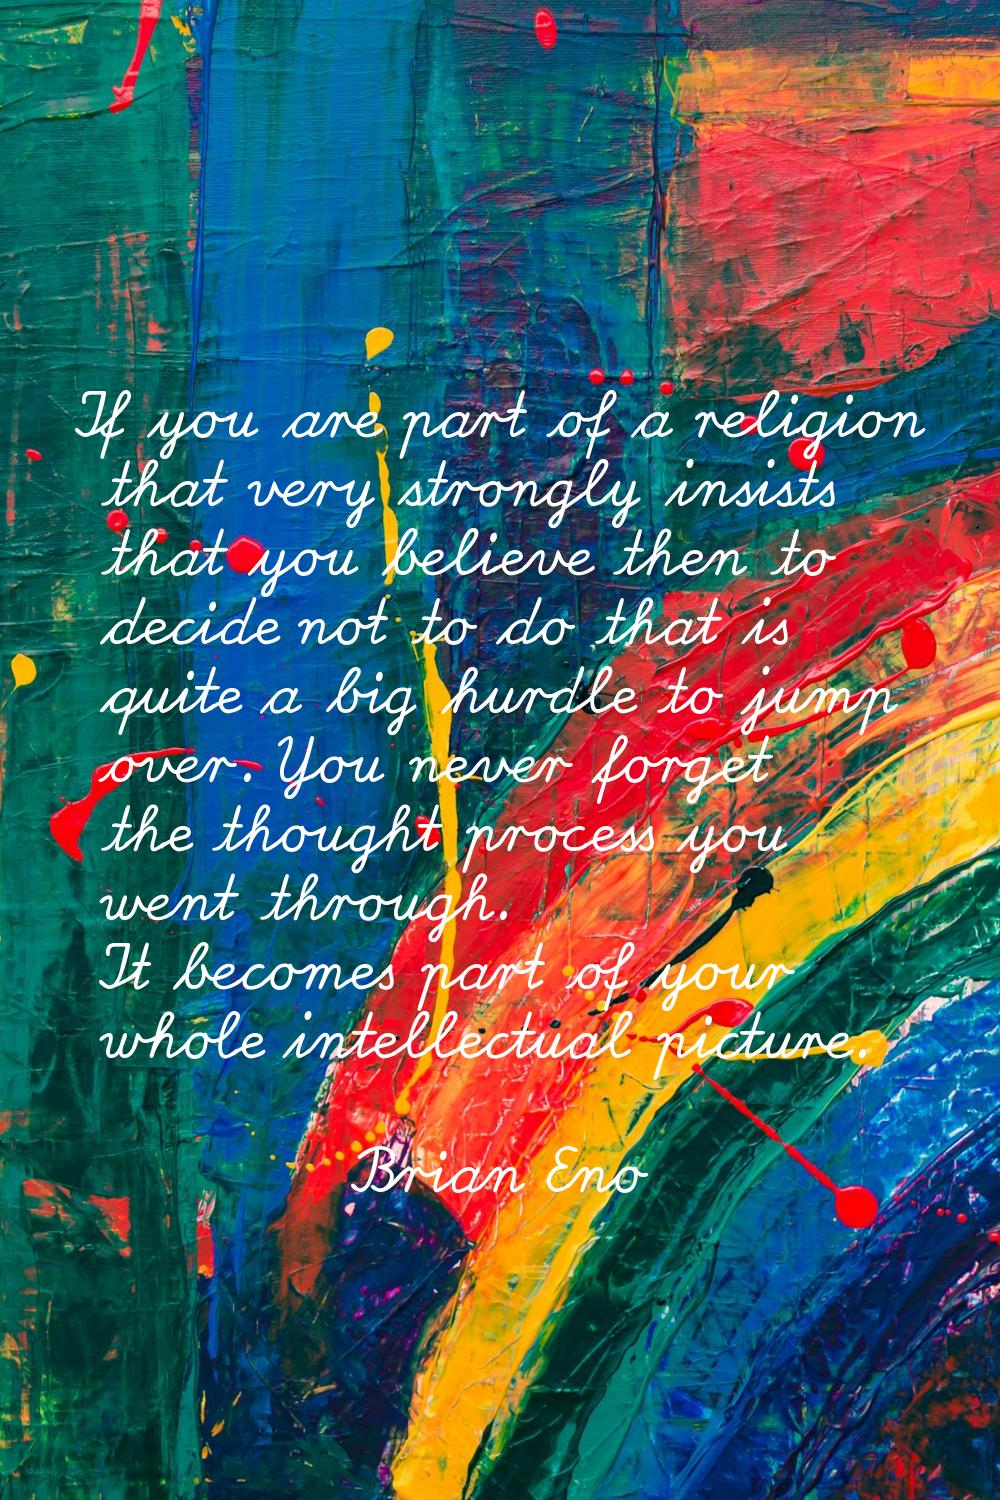 If you are part of a religion that very strongly insists that you believe then to decide not to do 